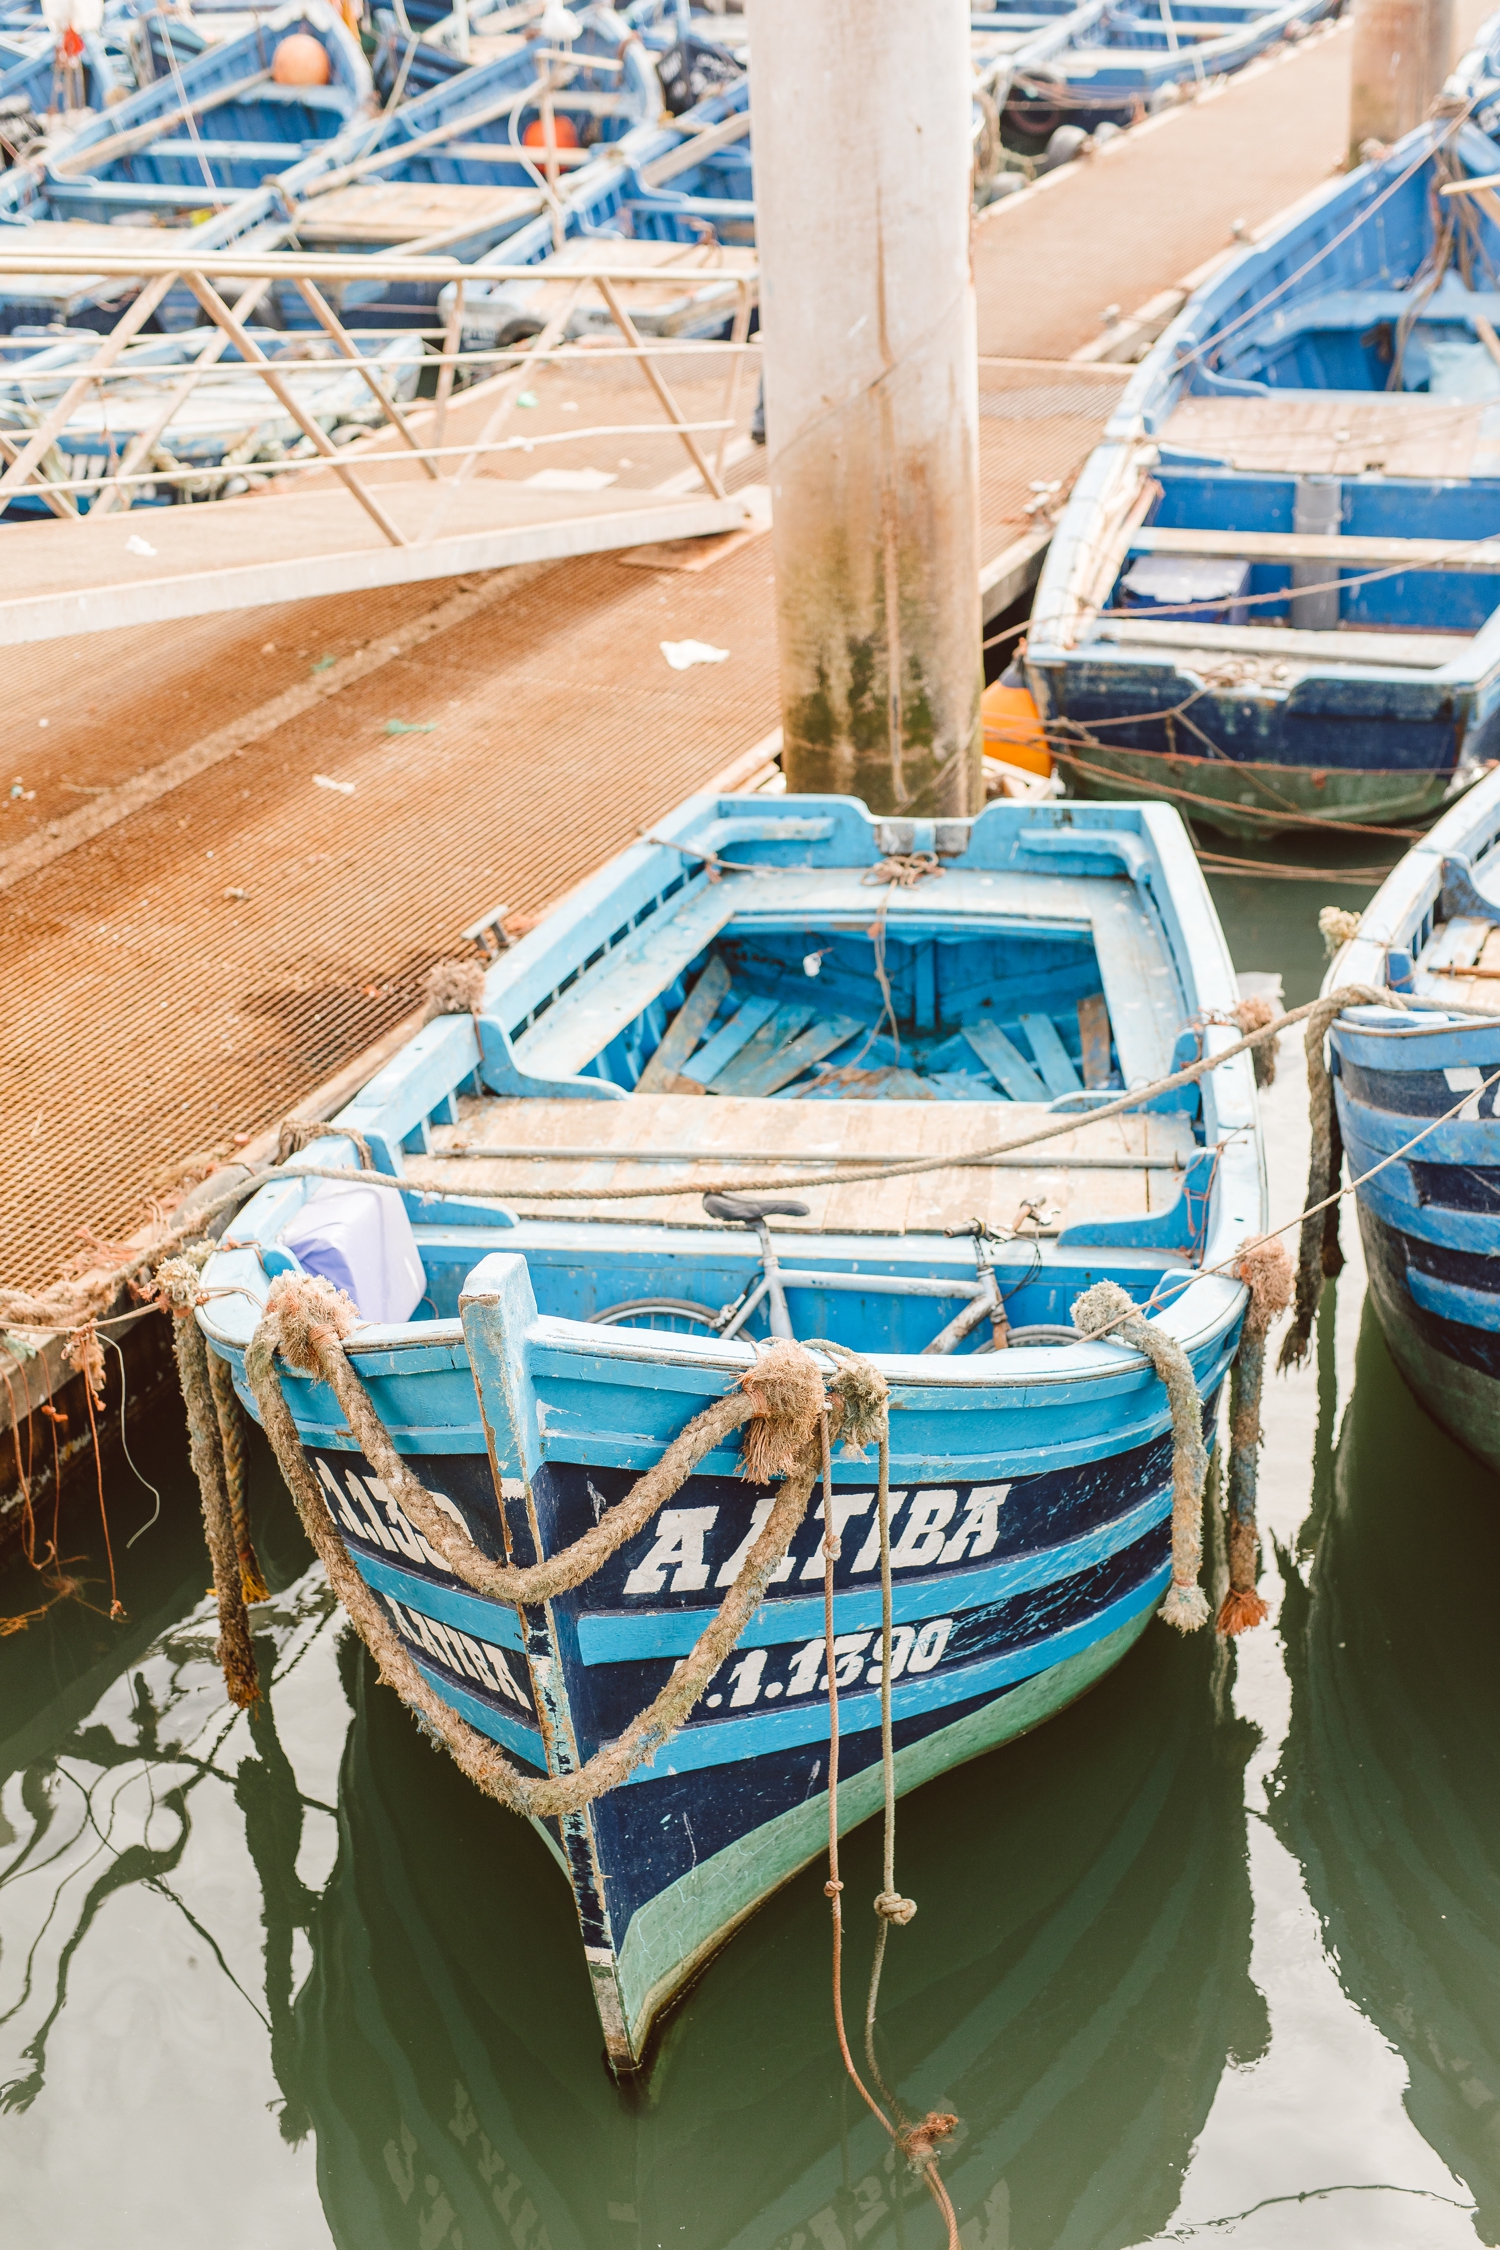 Bright blue fishing boat docked at pier in Marrakesh, Morocco | Brooke Michelle PHotography